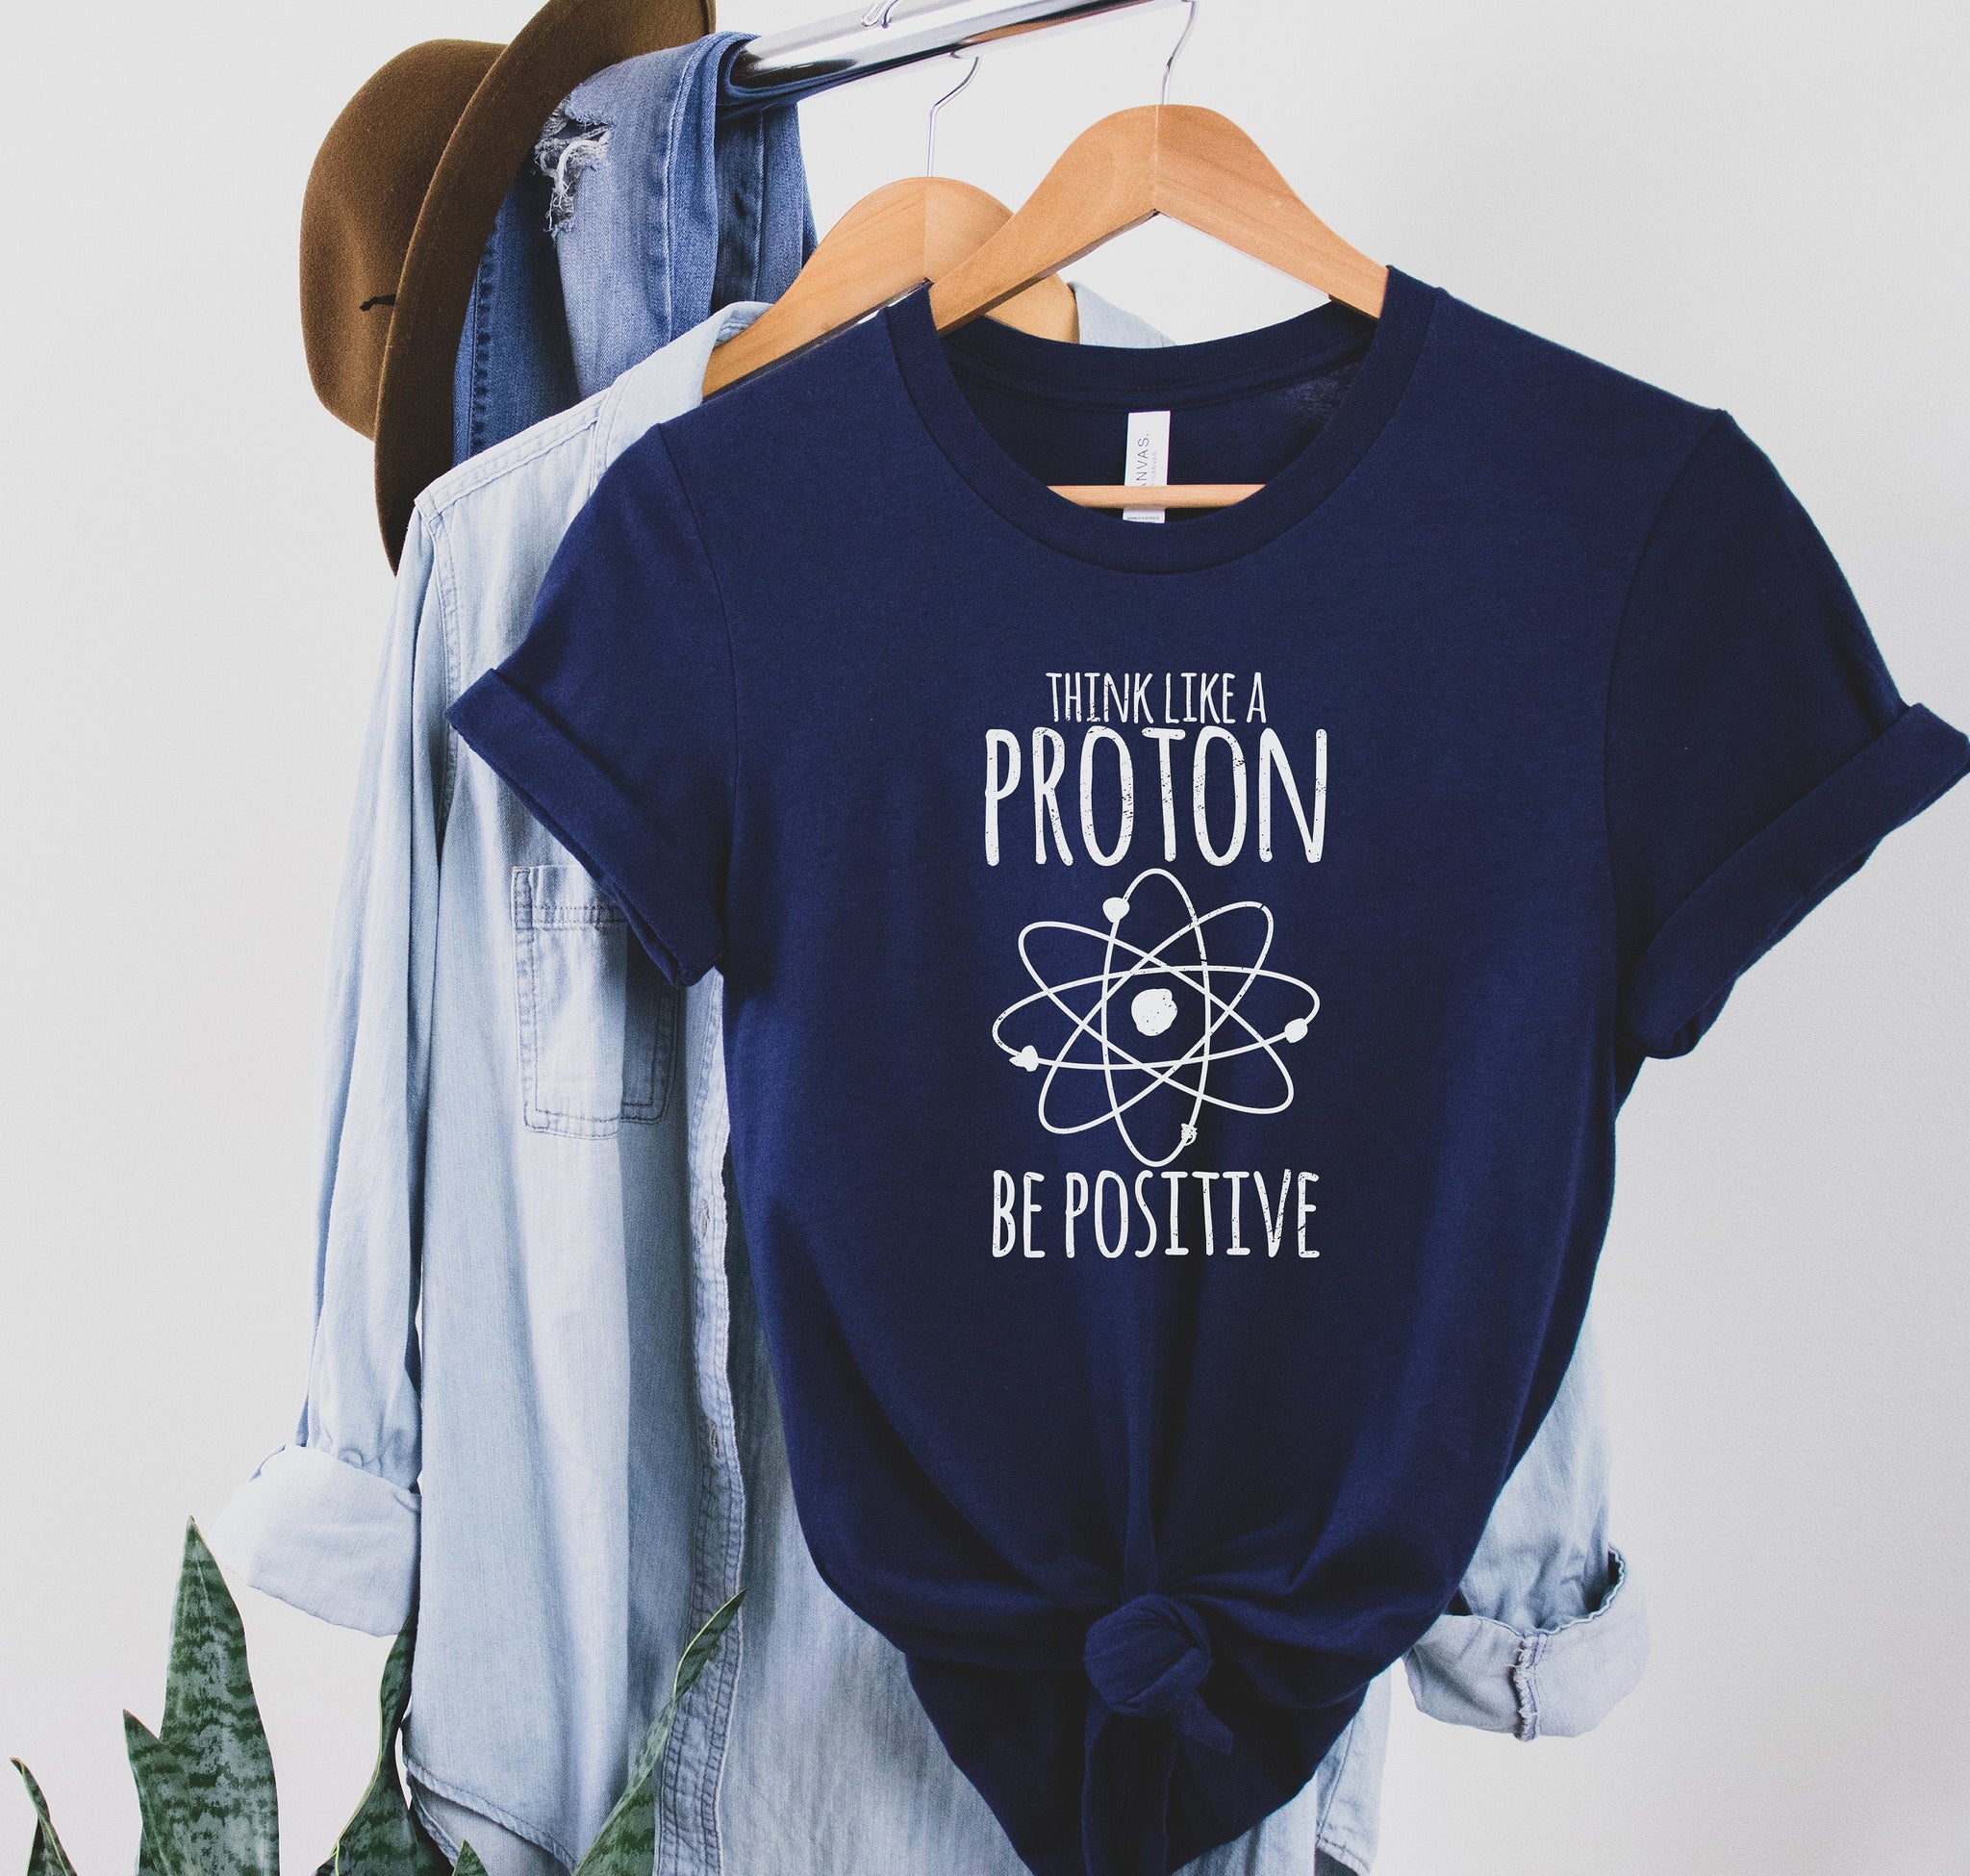 Be Like Proton Be Positive, Inspiration Shirt, Positive Vibes Shirt, Inspiration Outfit, Kindness Shirt, Believe There Is Good In The World